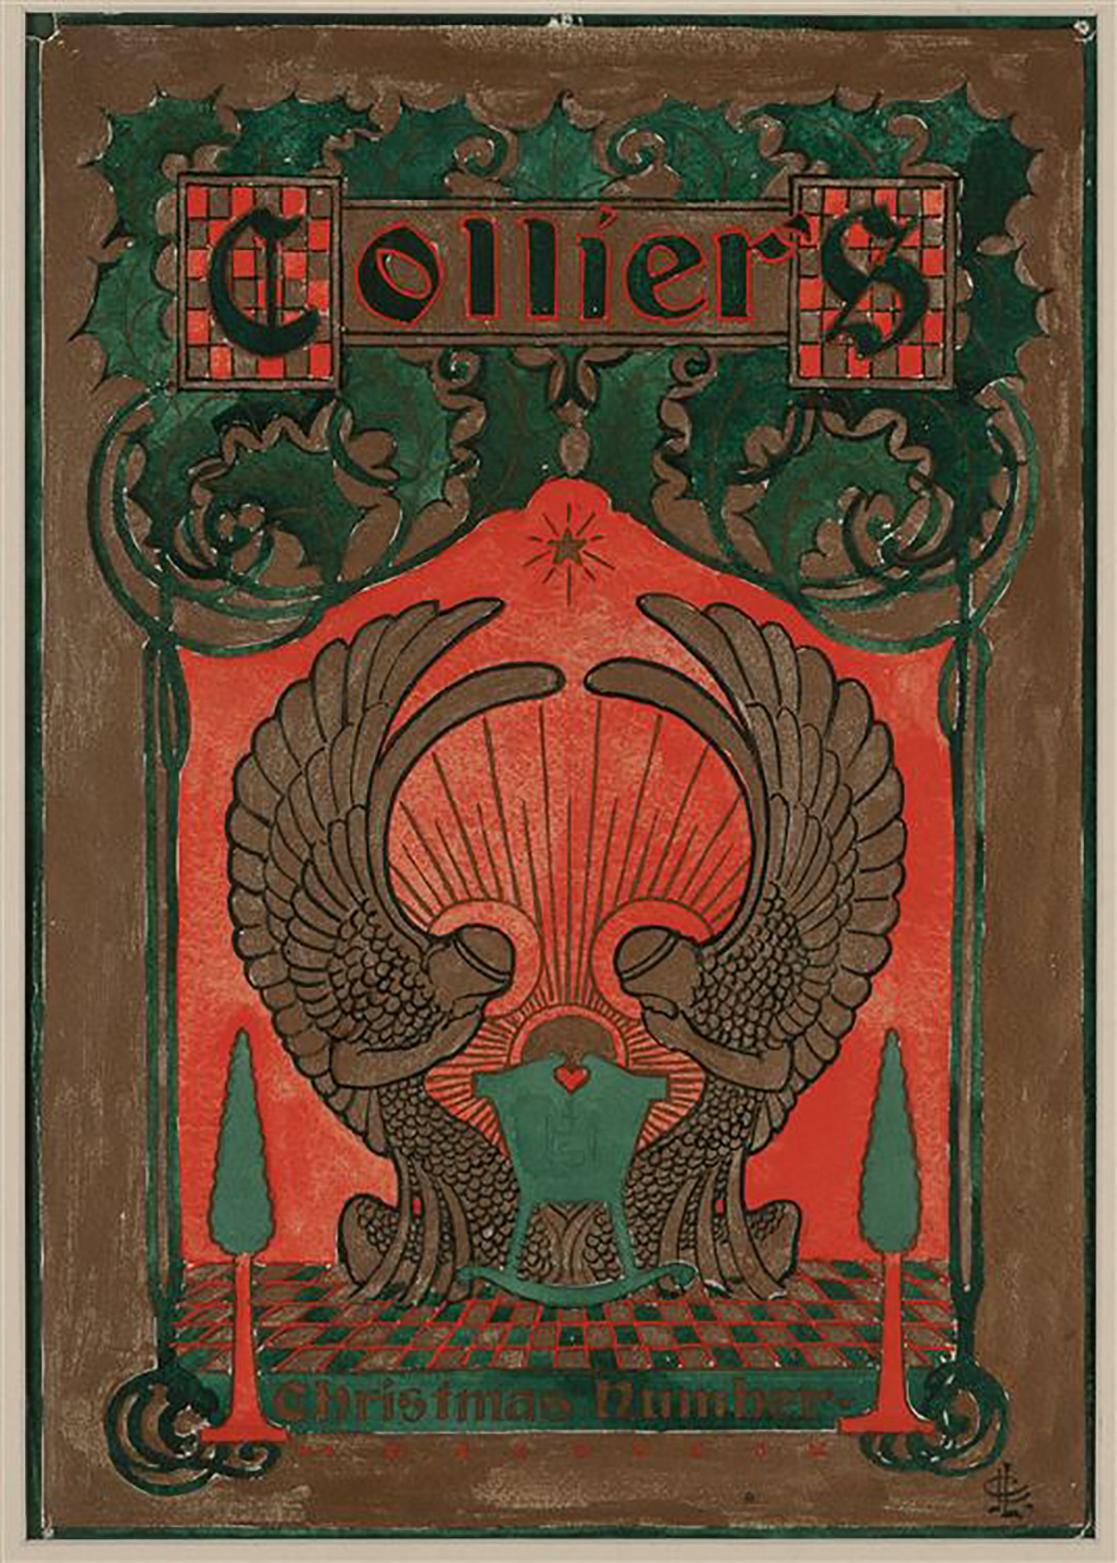 Collier's Christmas Number, Unpublished Cover - Art by Joseph Christian Leyendecker